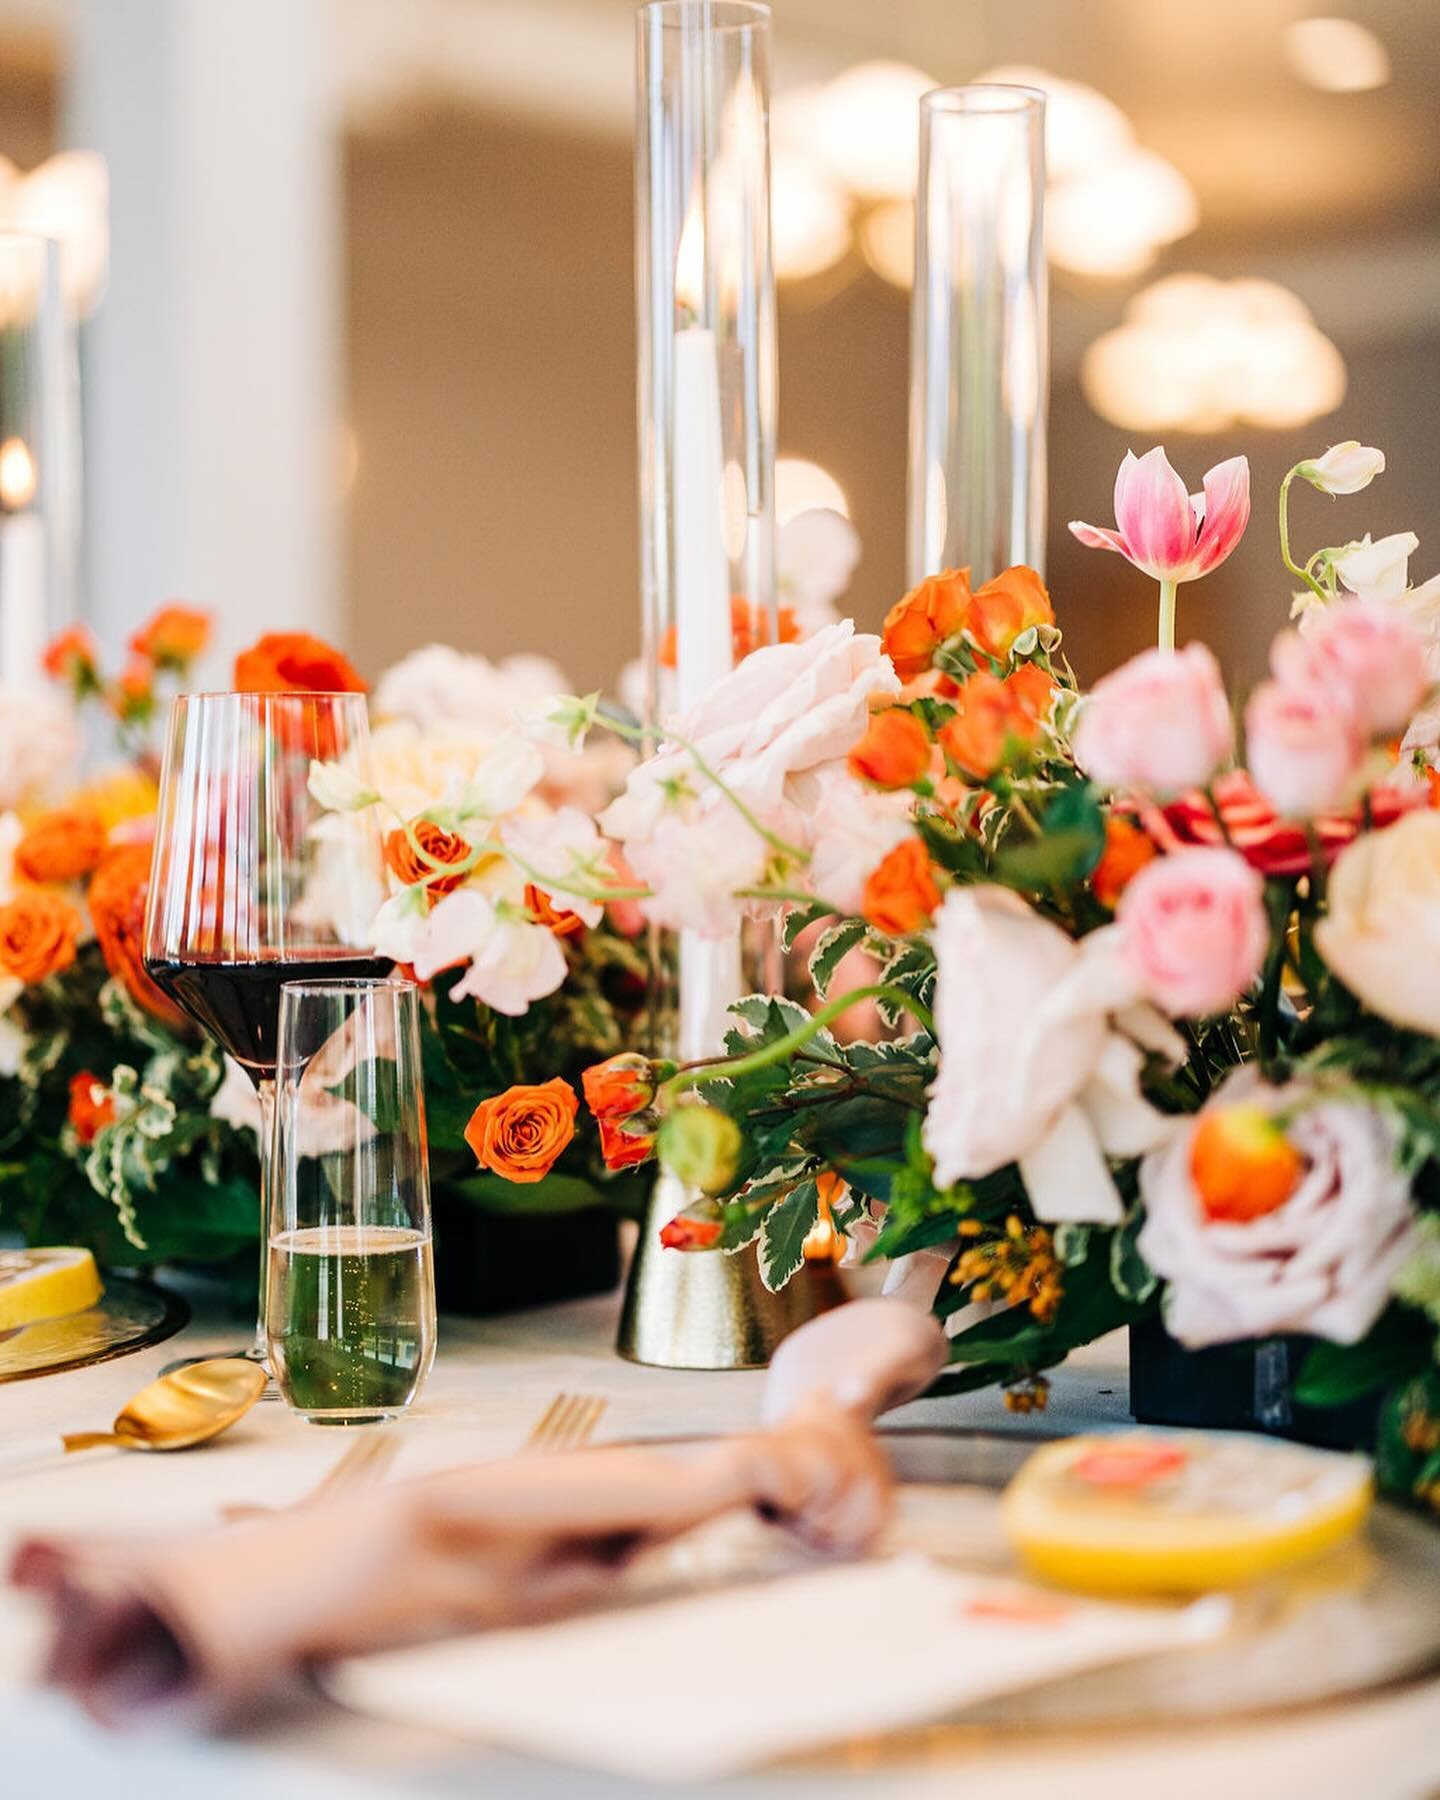 One of my current color obsessions for weddings is the color orange. 🍊 

Orange really doesn&rsquo;t get the love it deserves. If done right, you can still get all the impact without it being overpowering. 

So what do you think? Are you ready to le